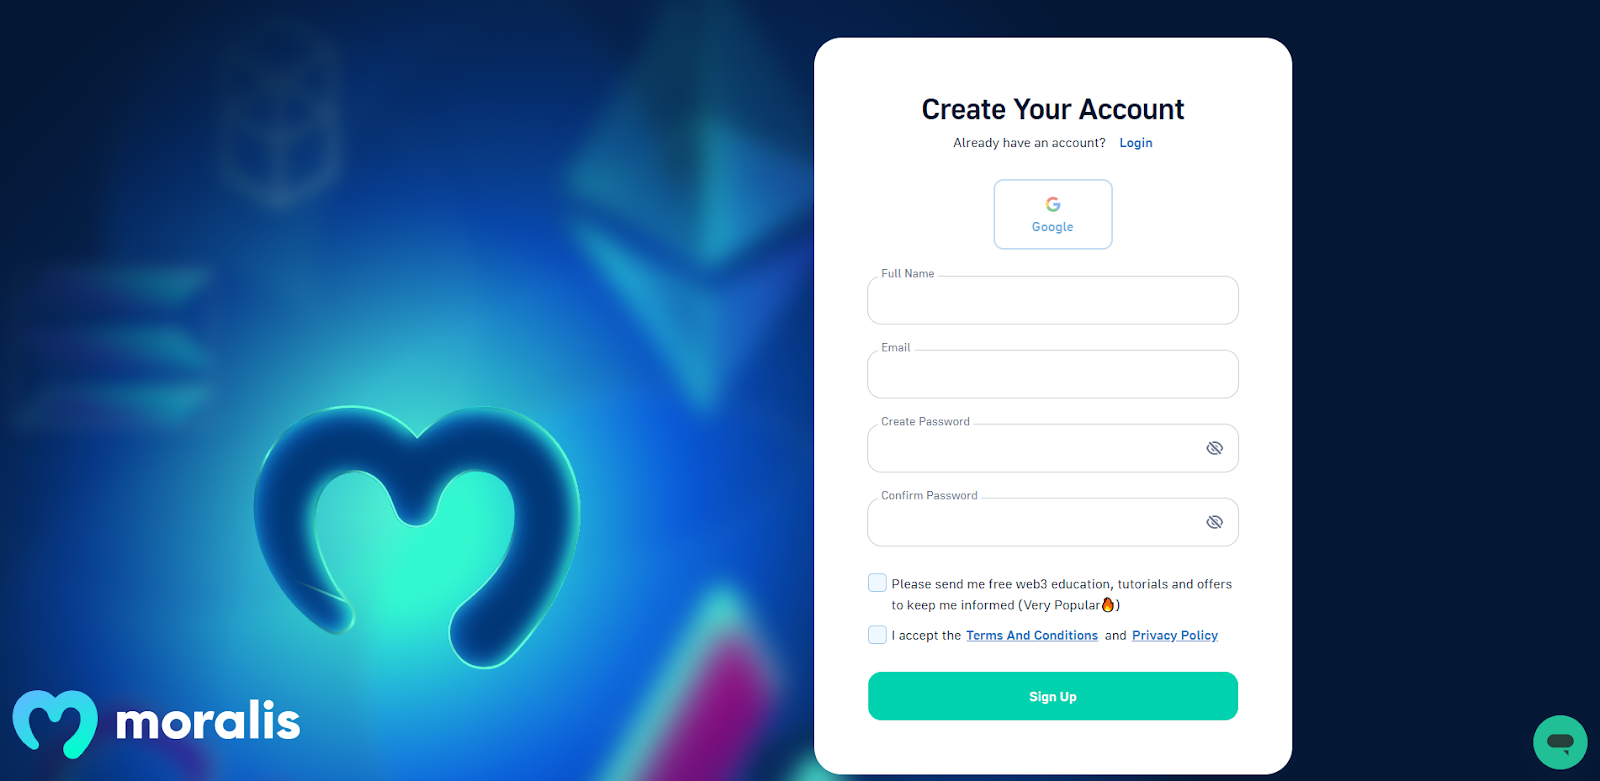 Create your account page.